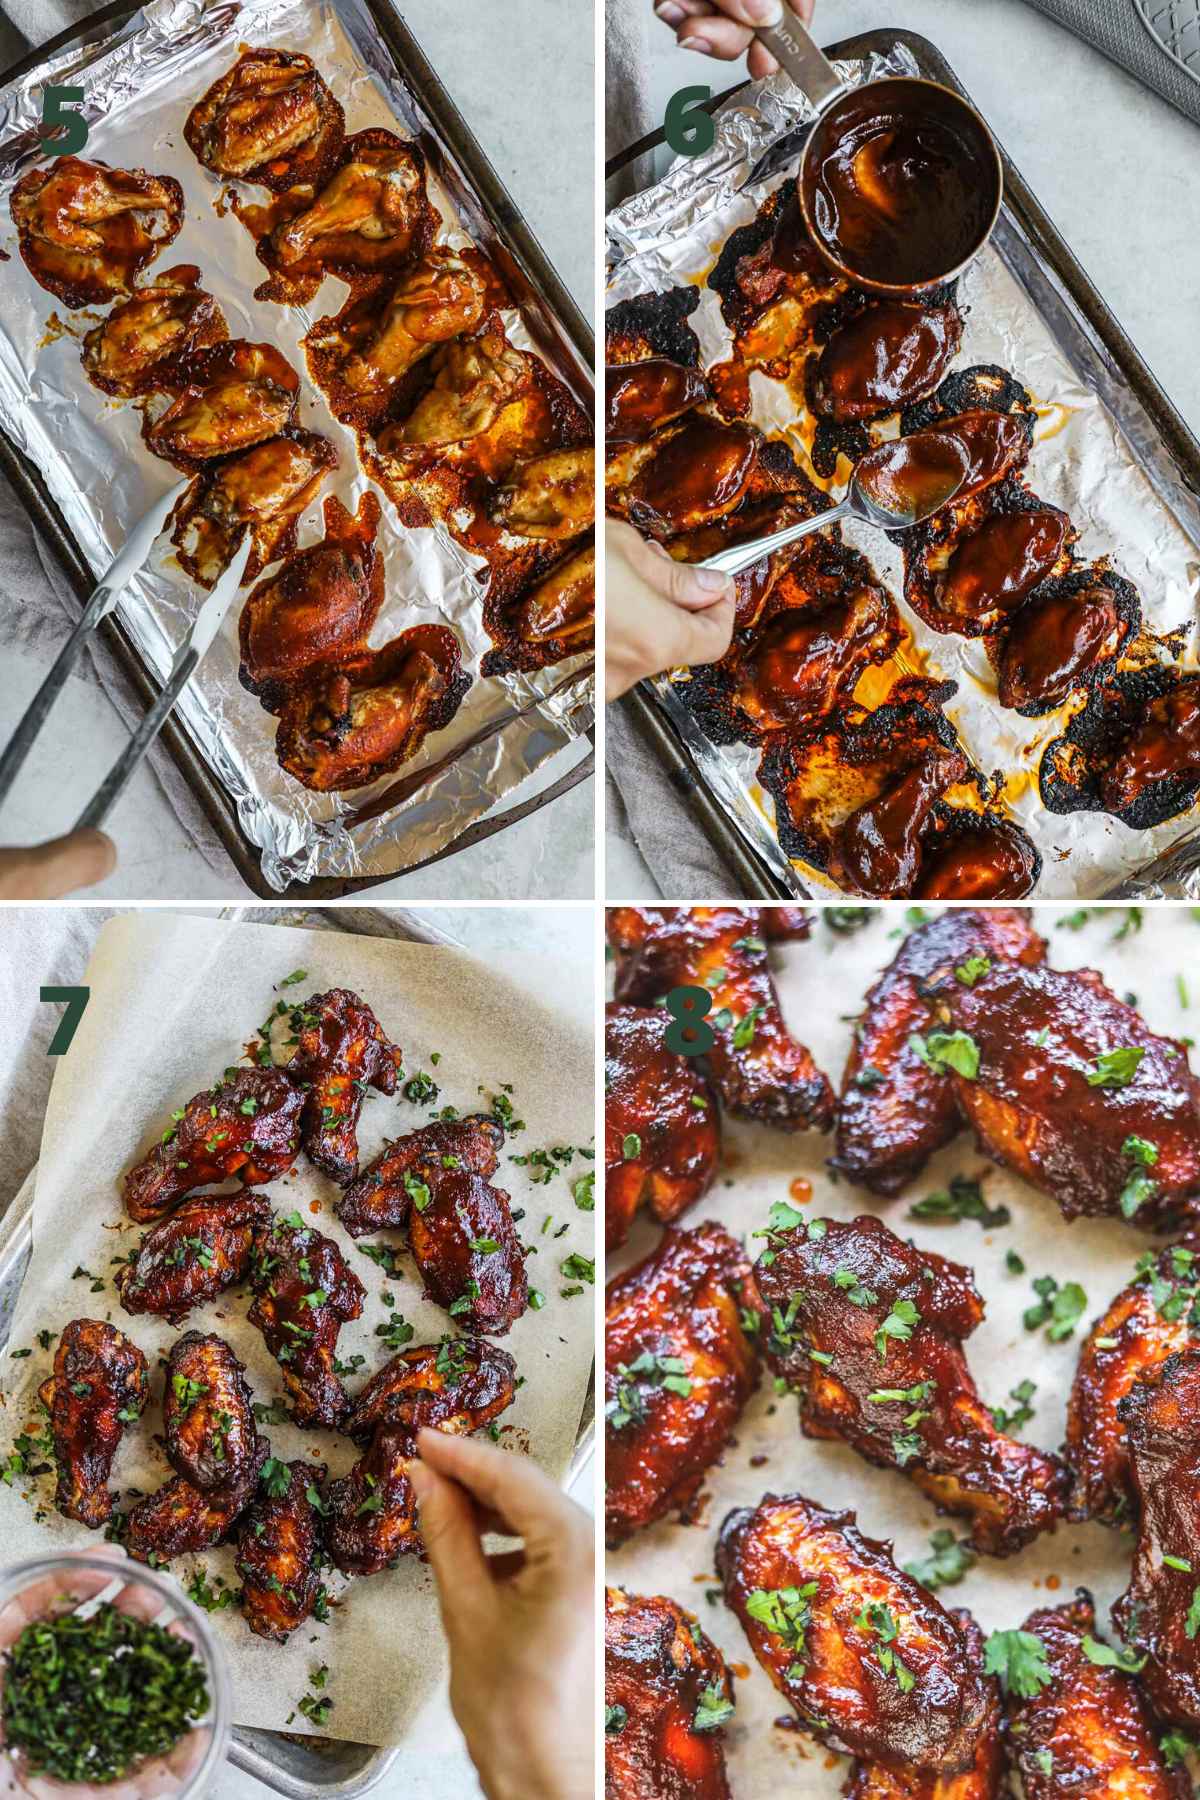 Steps to make honey bbq chicken wings, baking wings, flipping over, basting with bbq sauce, and topping with chopped cilantro.